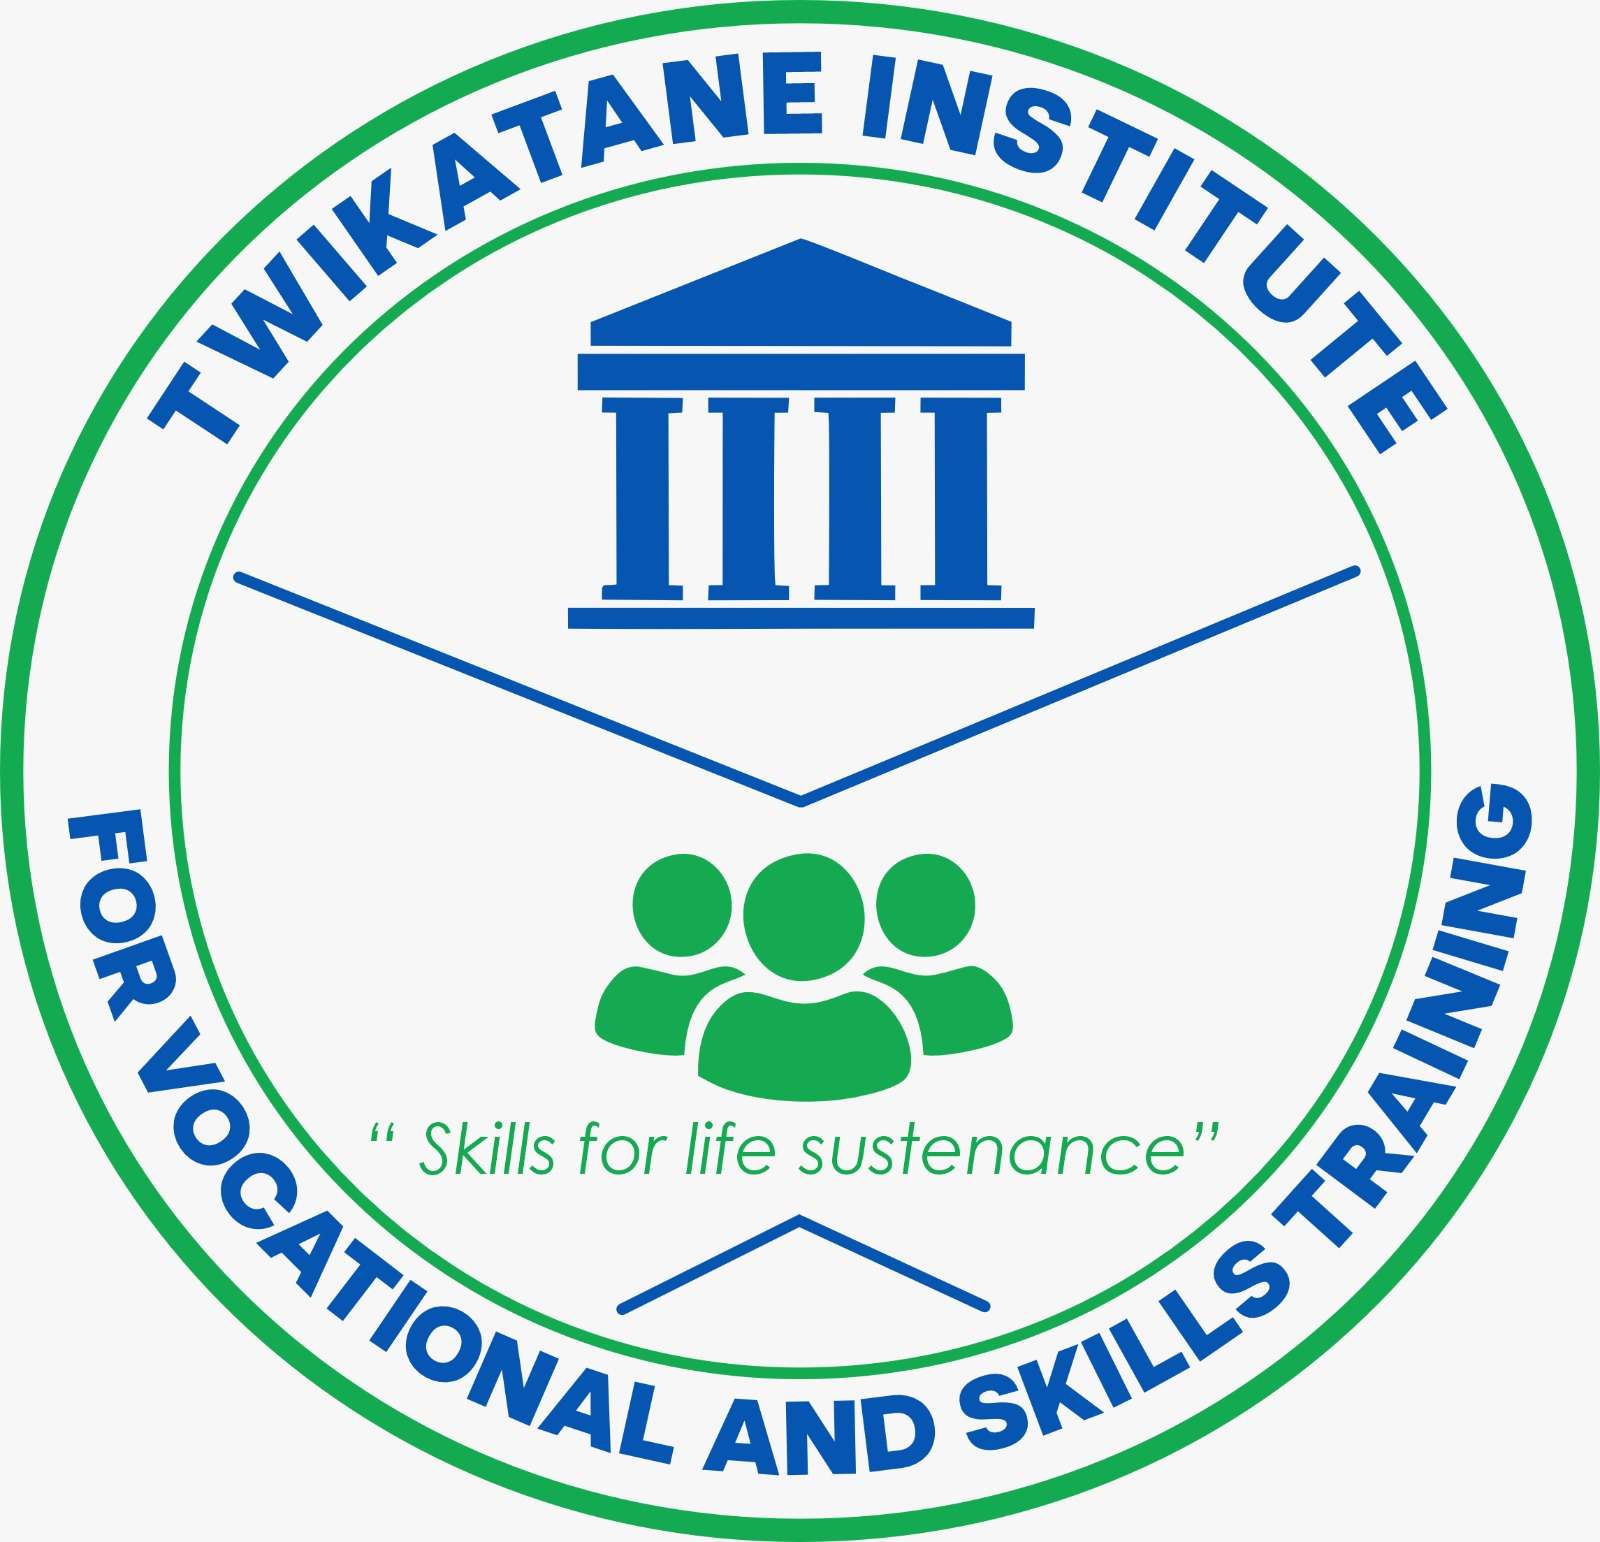 Twikatane Institute for Vocational and Skills Training